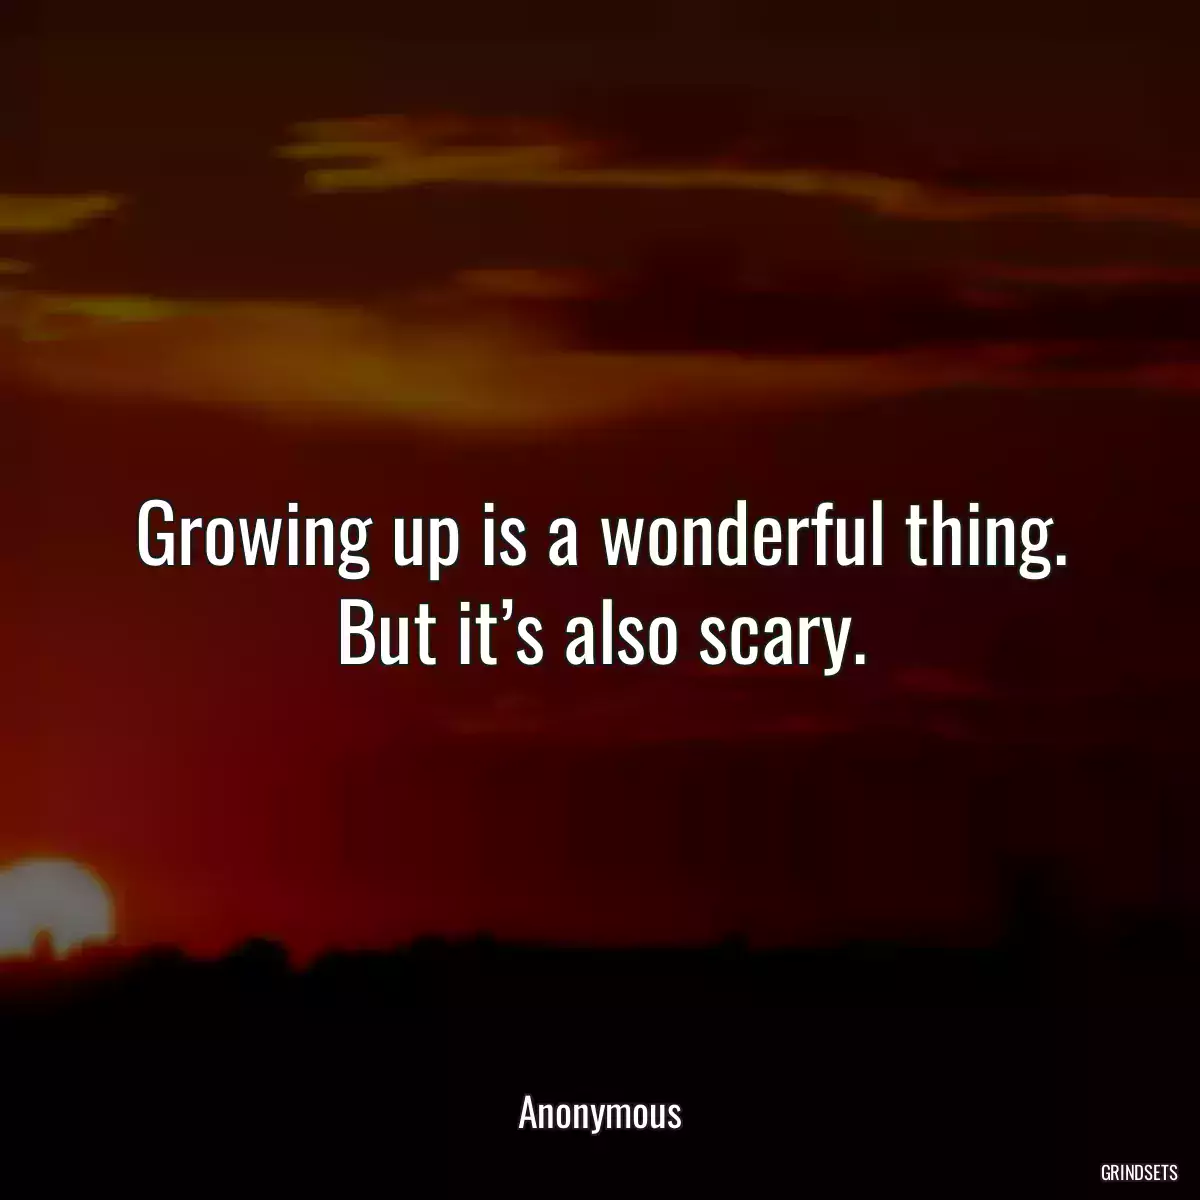 Growing up is a wonderful thing. But it’s also scary.